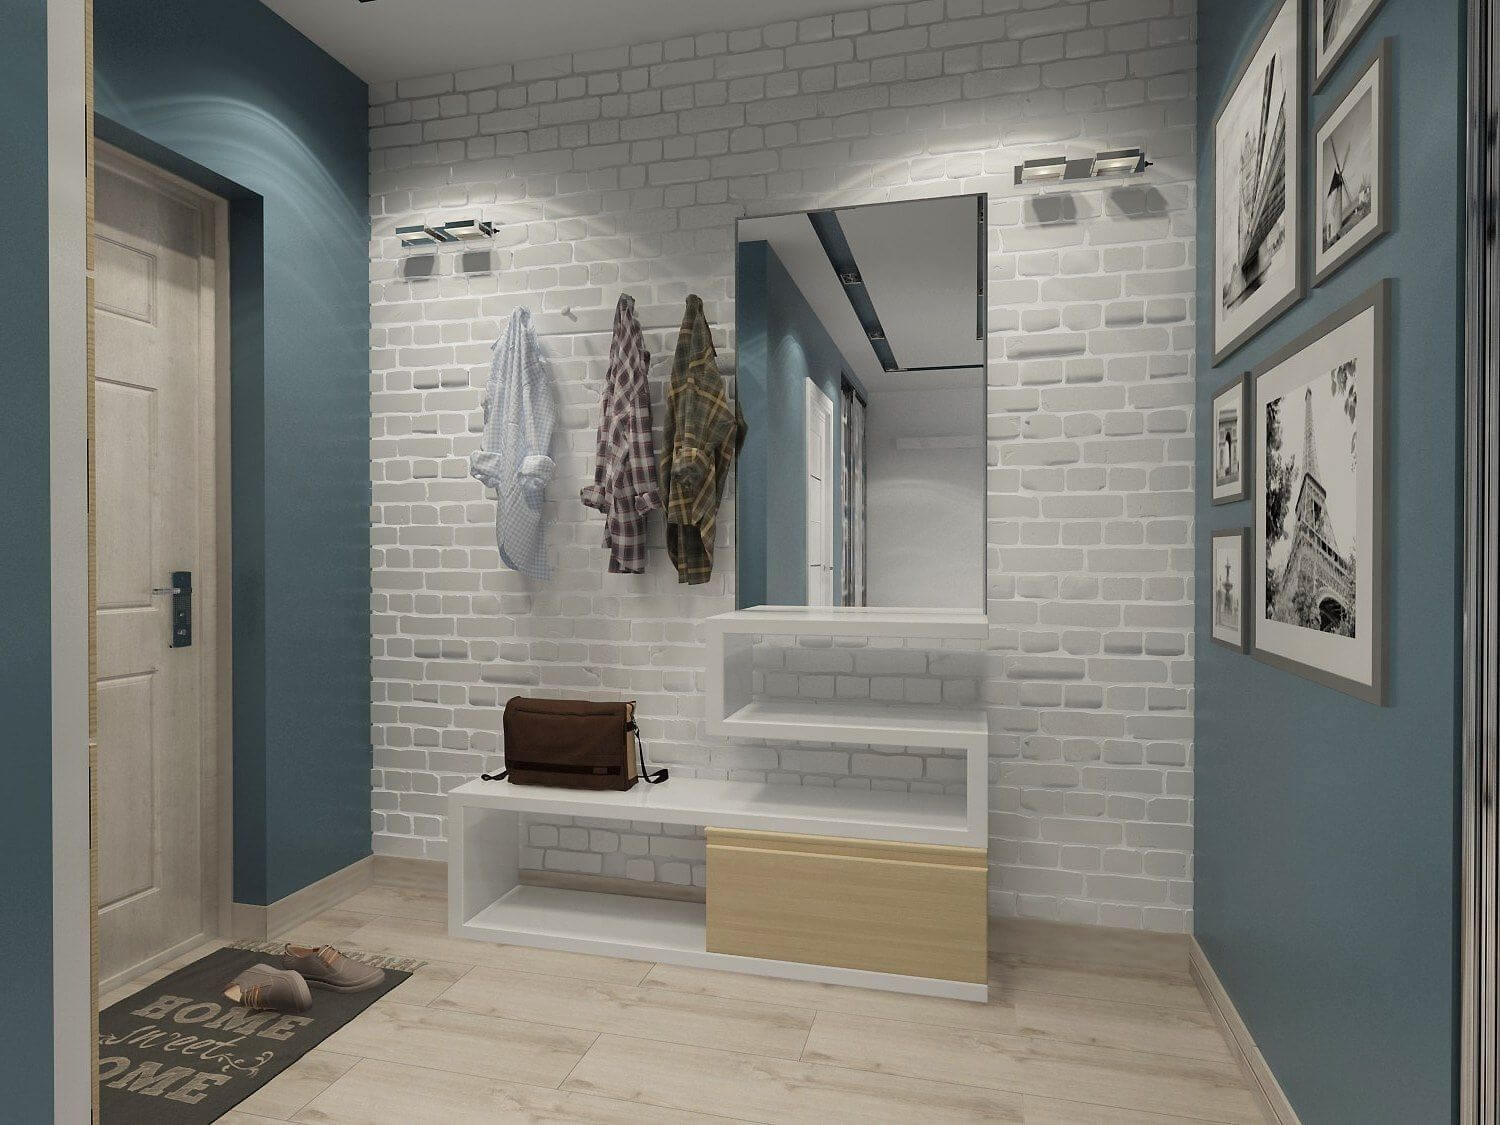 Hallway Stone Finishing Modern Design Ideas. White and cerulean blue color palette and light wooden laminate